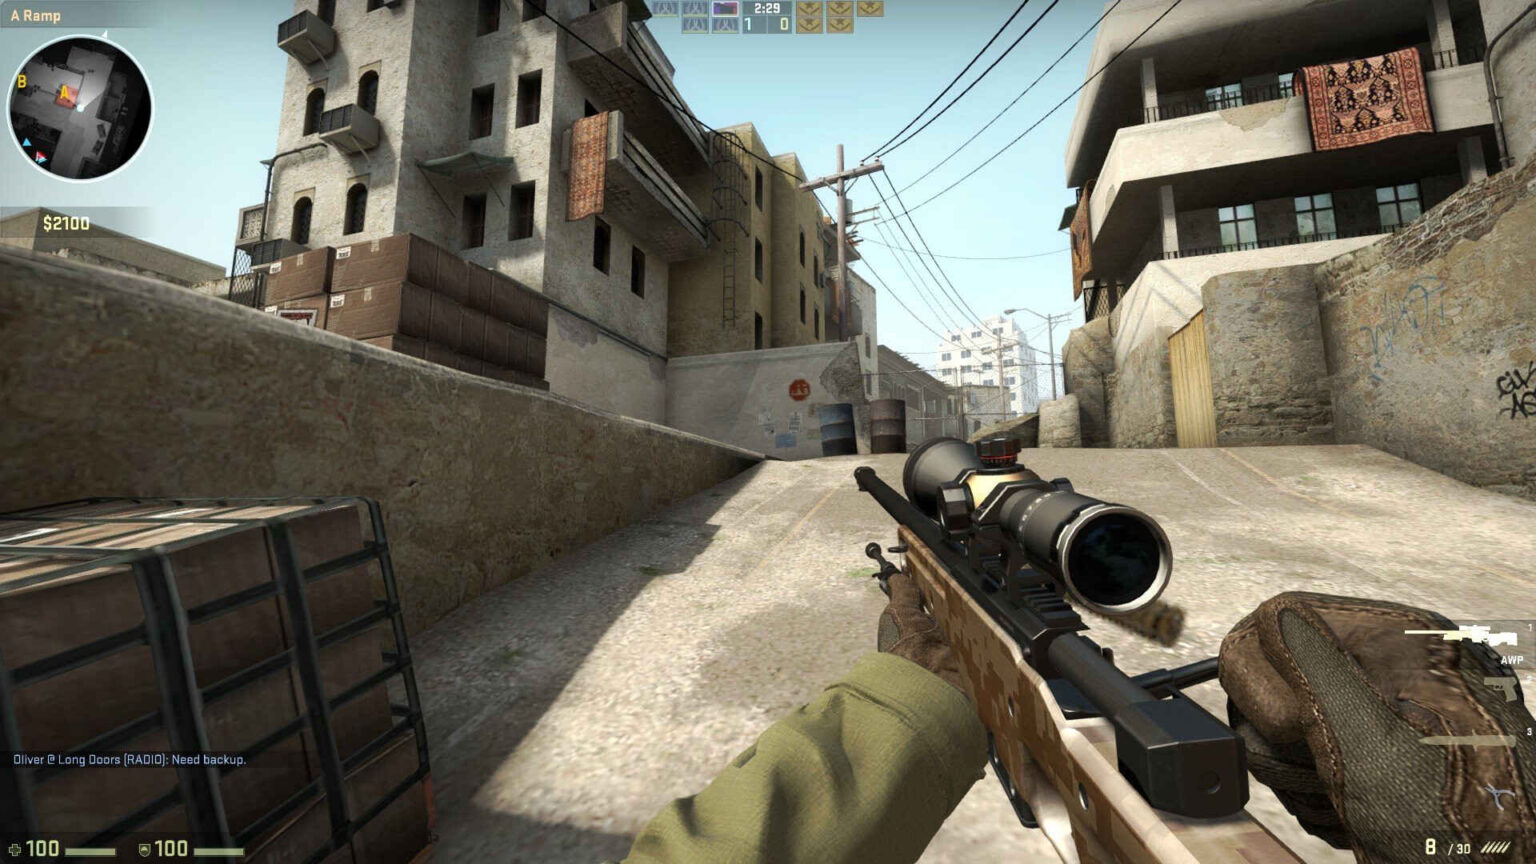 'Counter Strike' is an online multiplayer, first-person shooter video game that took the world by storm ten years ago. Discover why you should play.